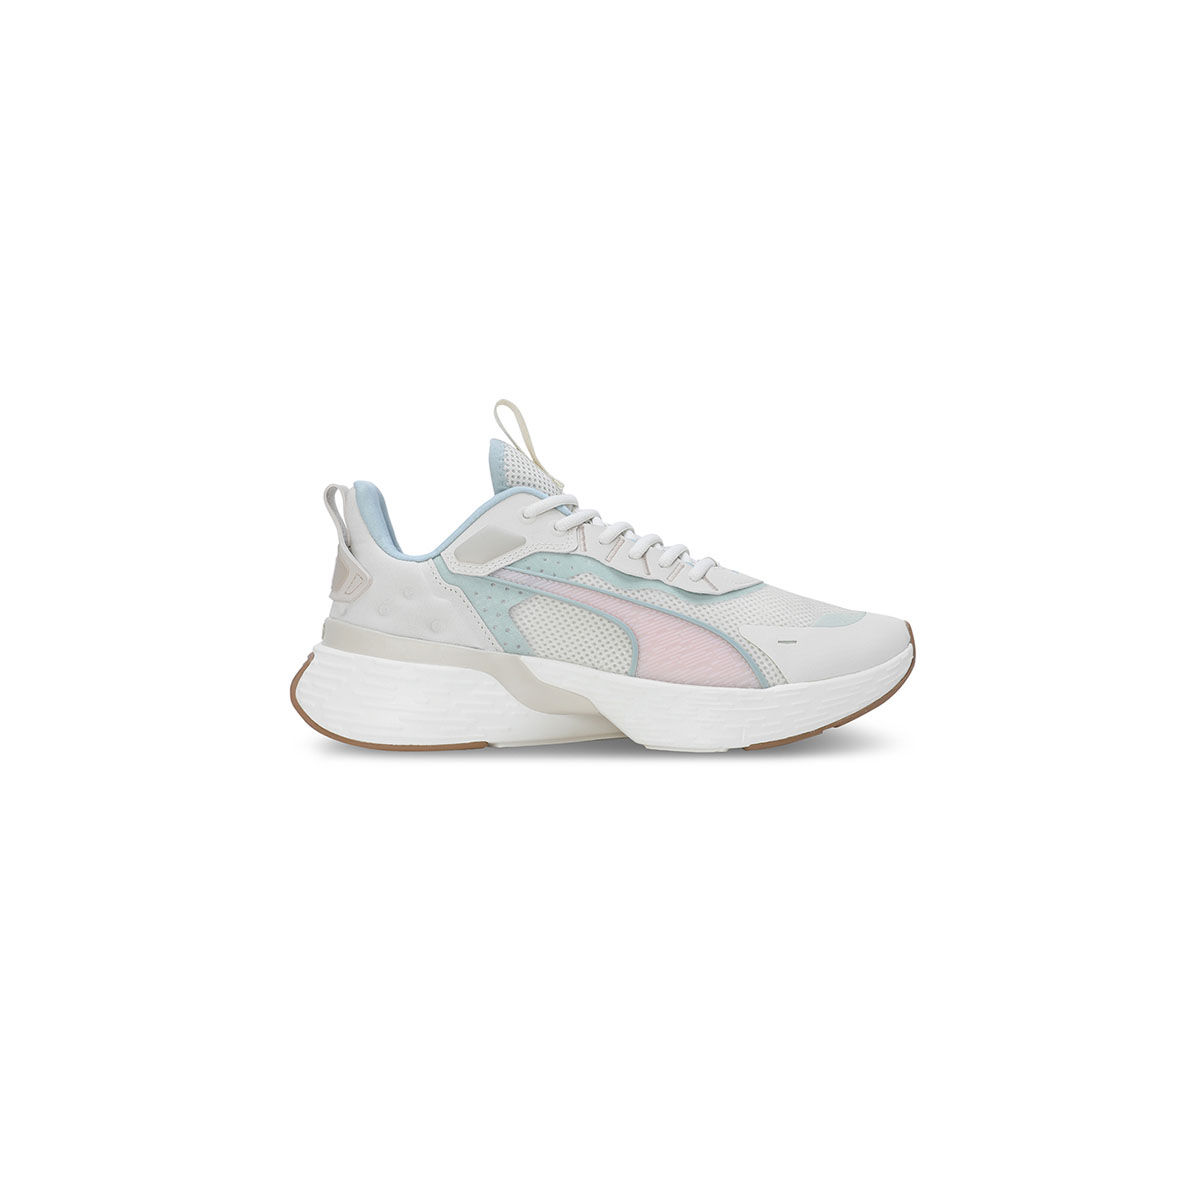 PUMA Rider FV sneakers in off white | ASOS